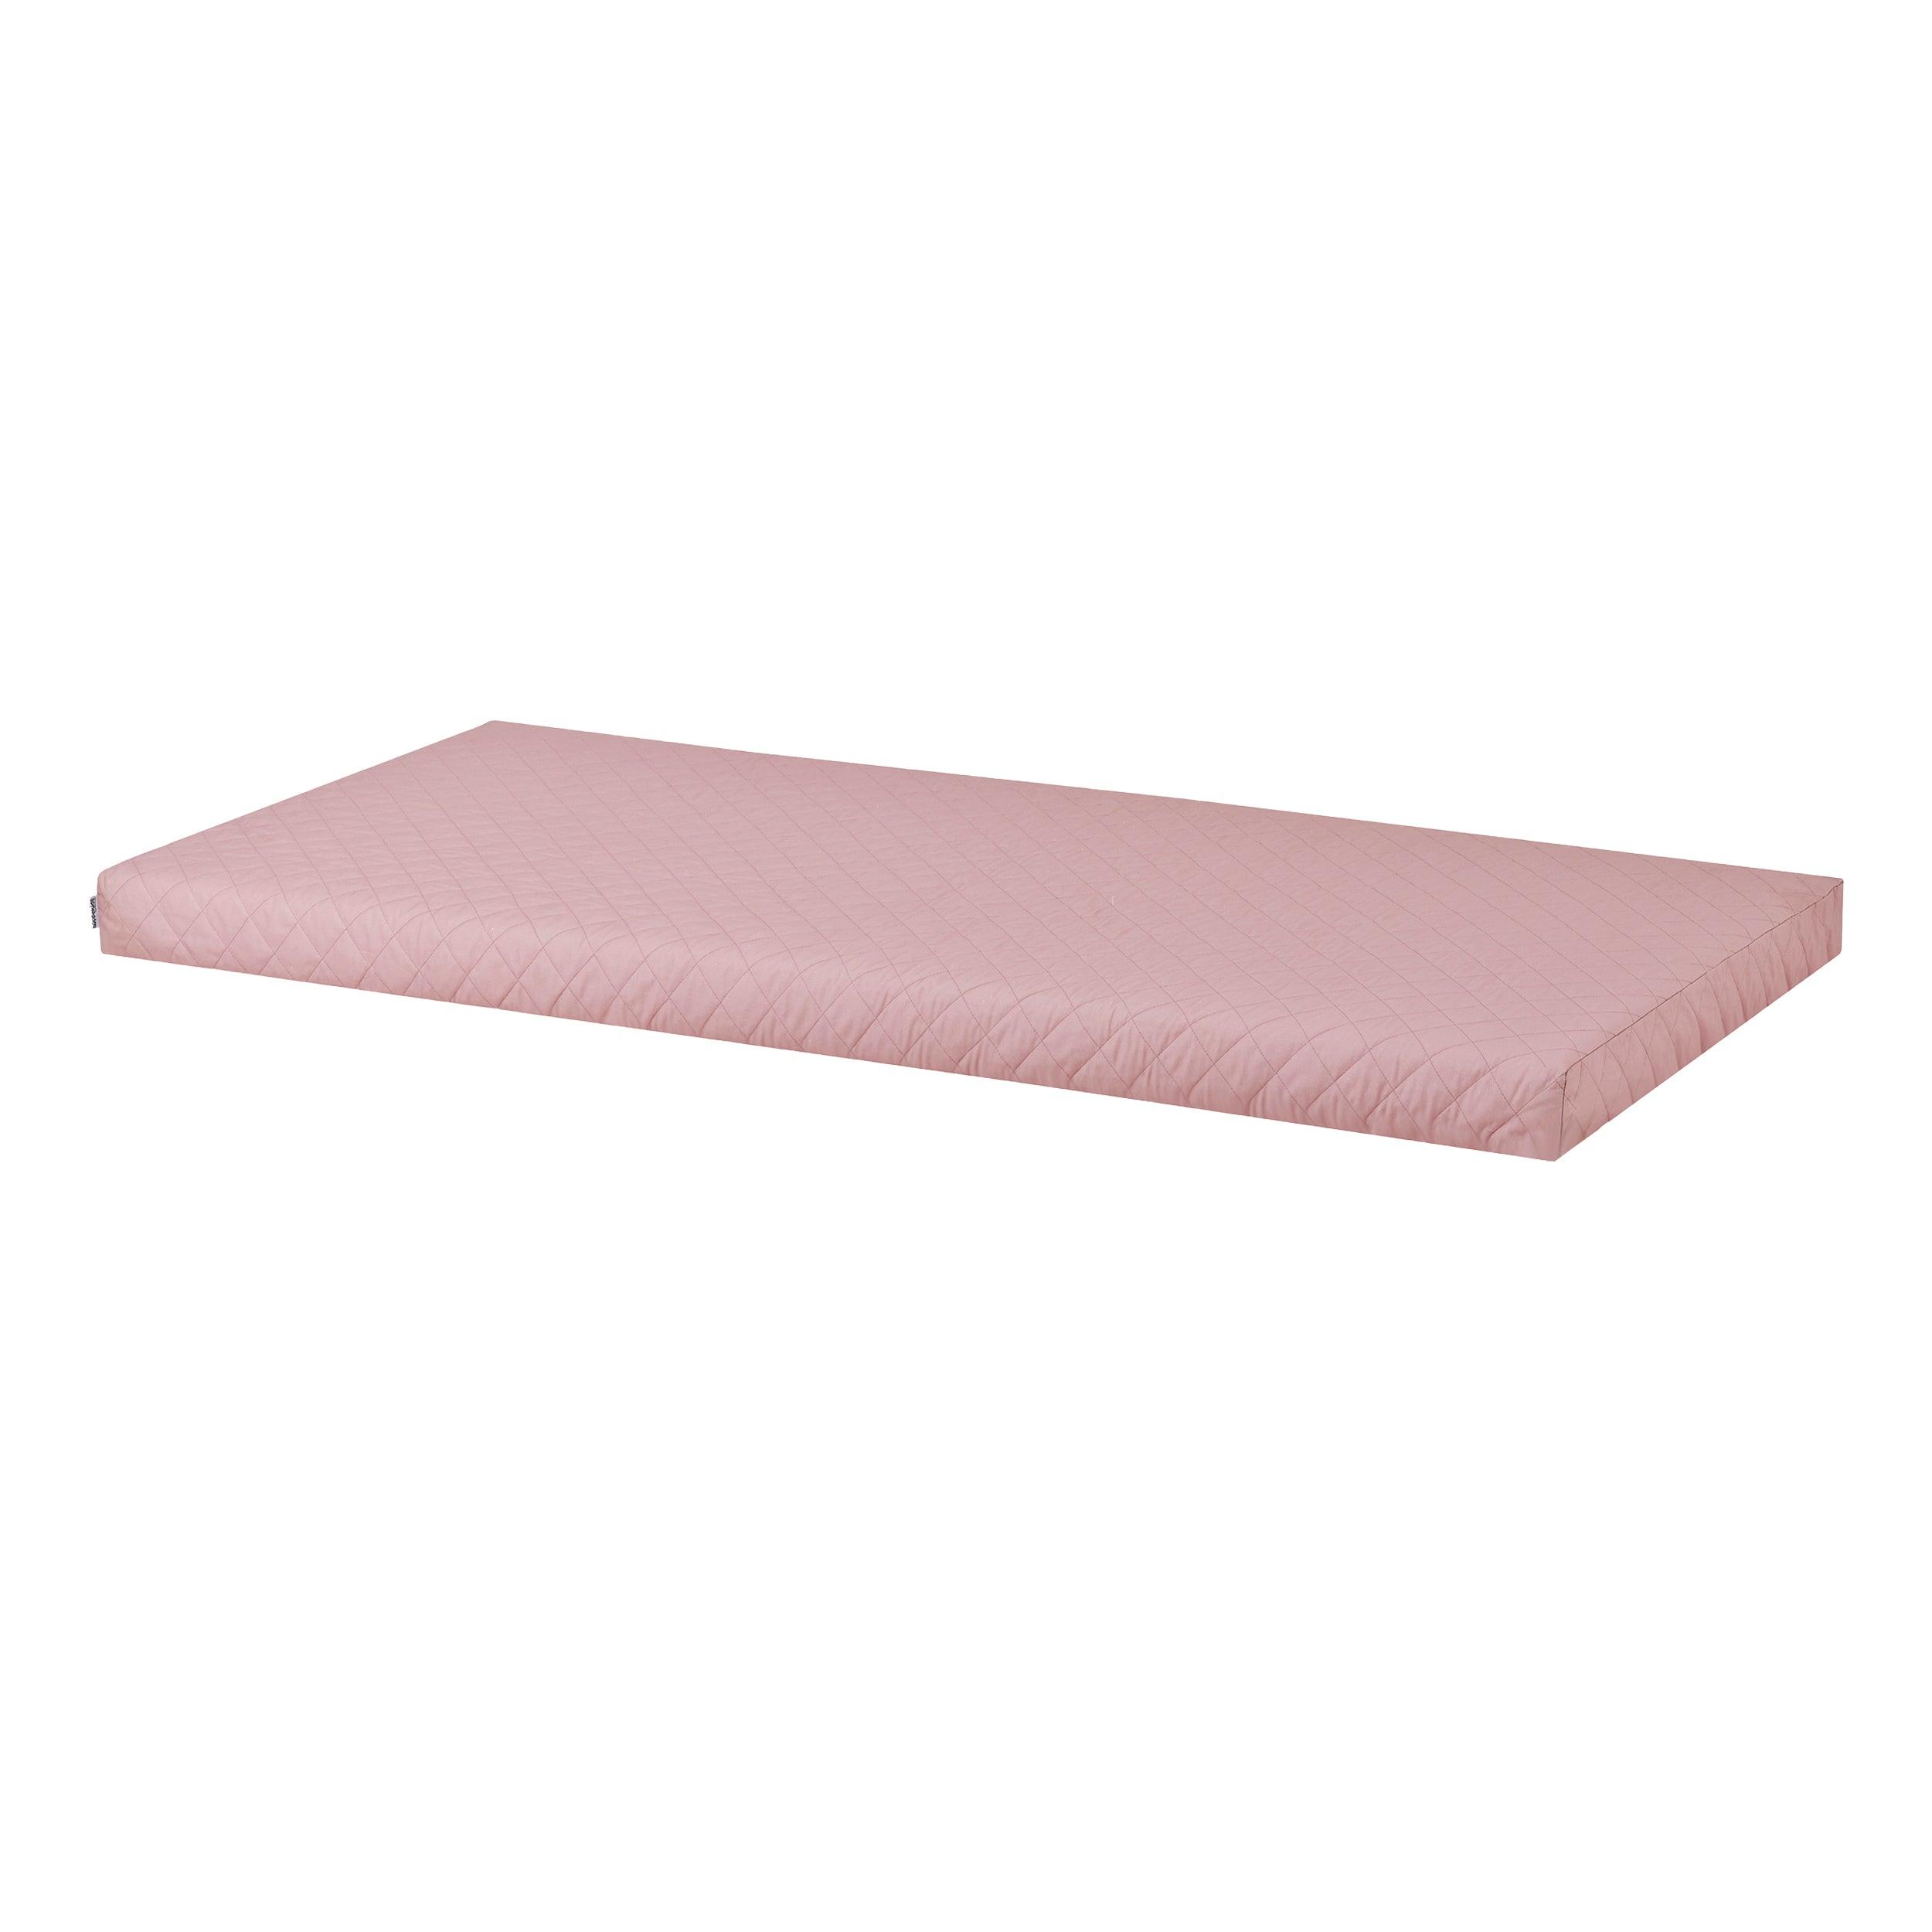 Hoppekids cold foam mattress including quilted cover